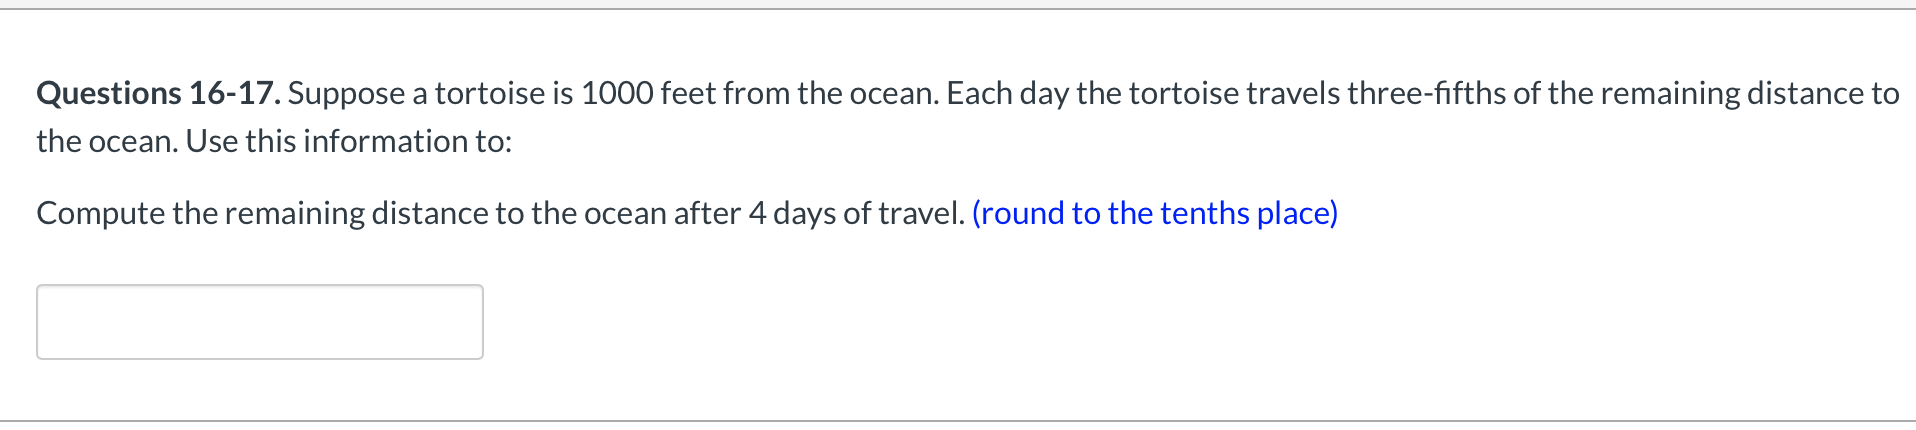 Questions 16-17. Suppose a tortoise is 1000 feet from the ocean. Each day the tortoise travels three-fifths of the remaining distance to
the ocean. Use this information to:
Compute the remaining distance to the ocean after 4 days of travel. (round to the tenths place)
